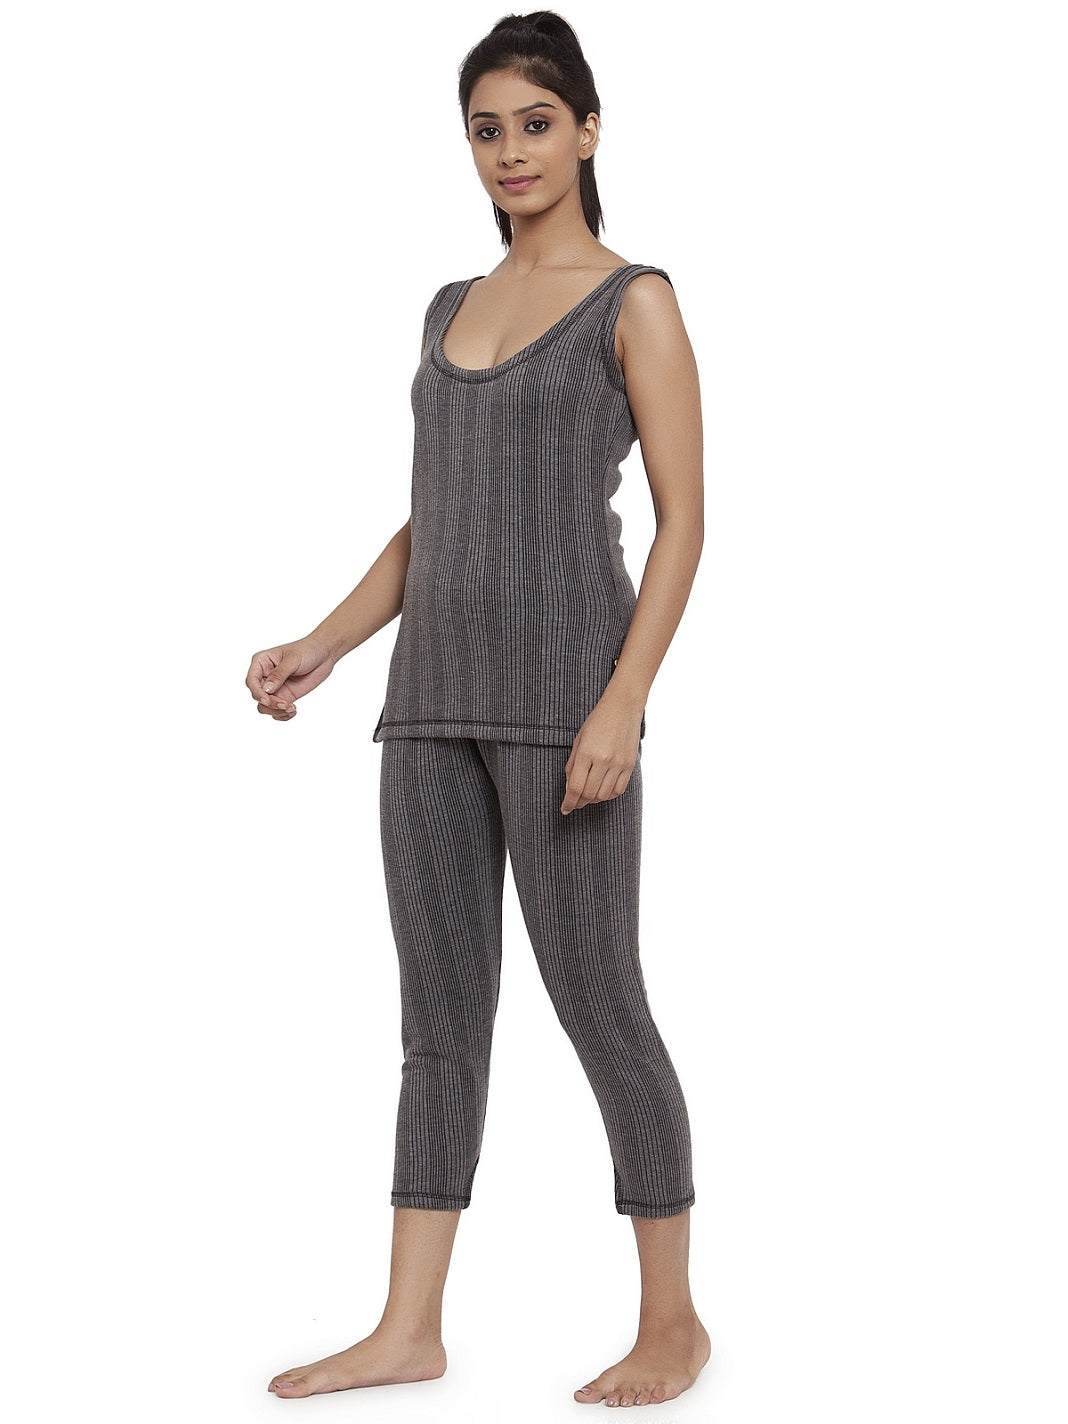 Women's Sleeveless Thermal Top And Lower Set